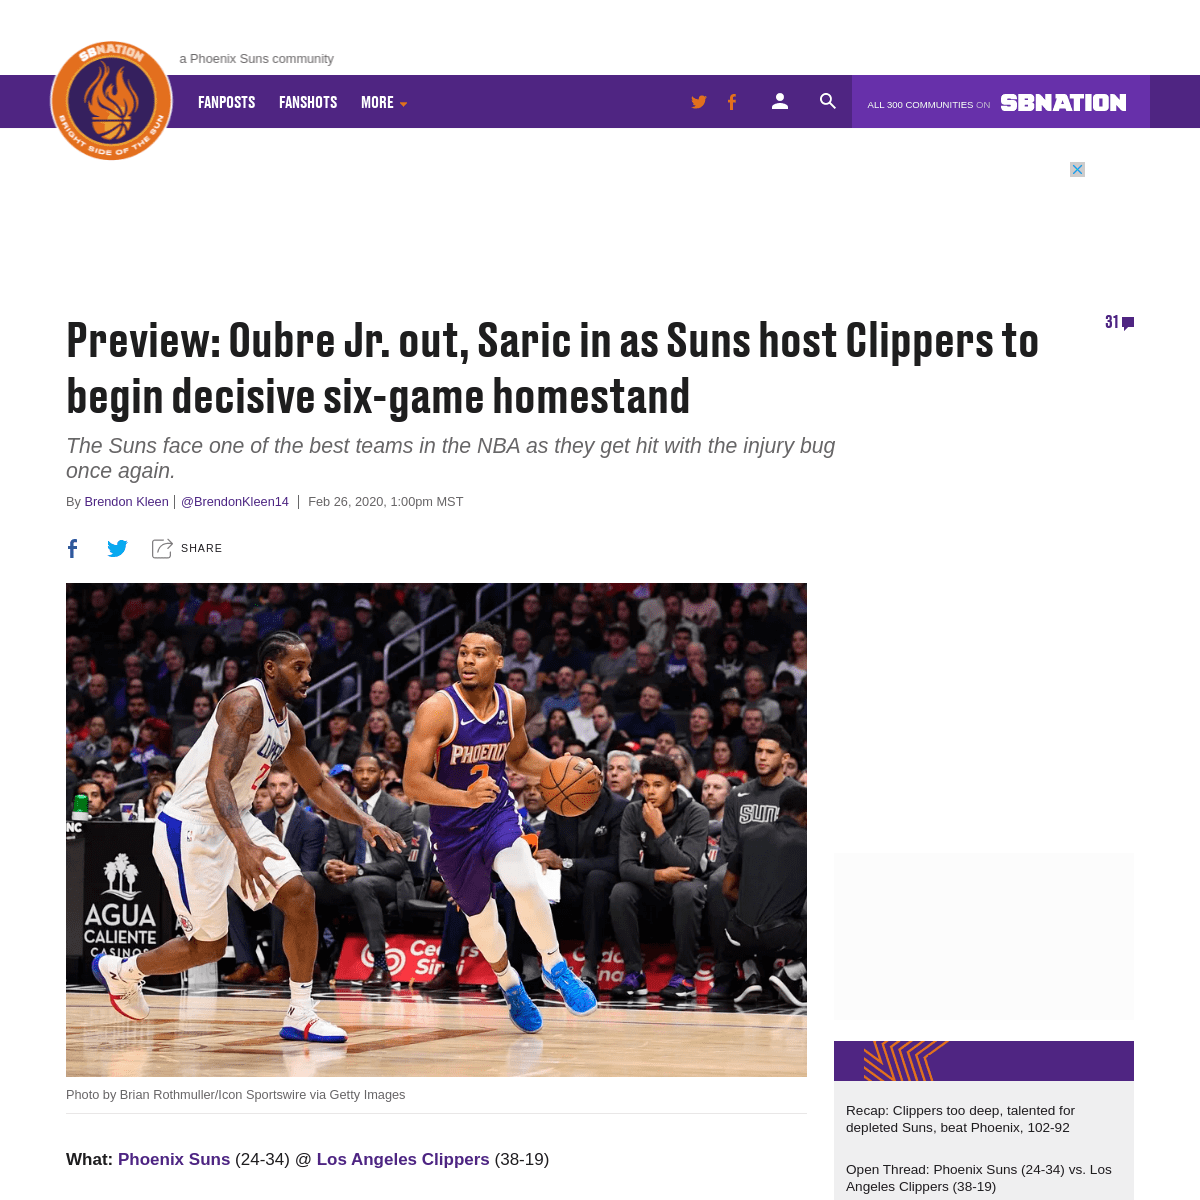 A complete backup of www.brightsideofthesun.com/2020/2/26/21154844/preview-kelly-oubre-out-phoenix-suns-host-clippers